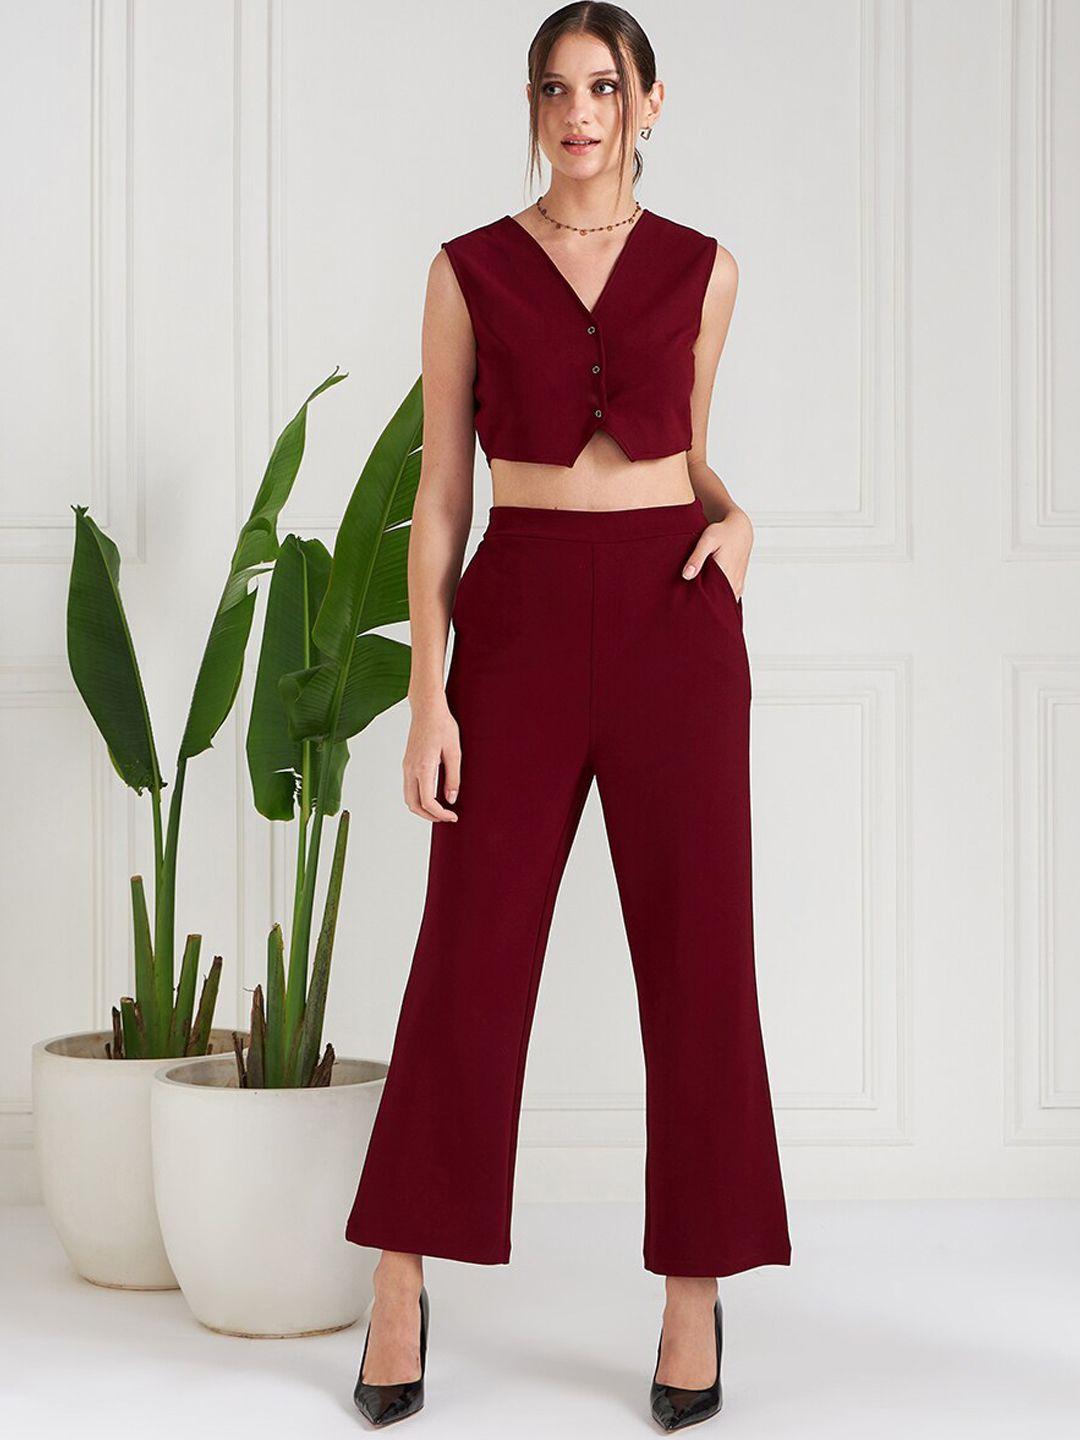 athena v-neck crop top with trousers co-ords